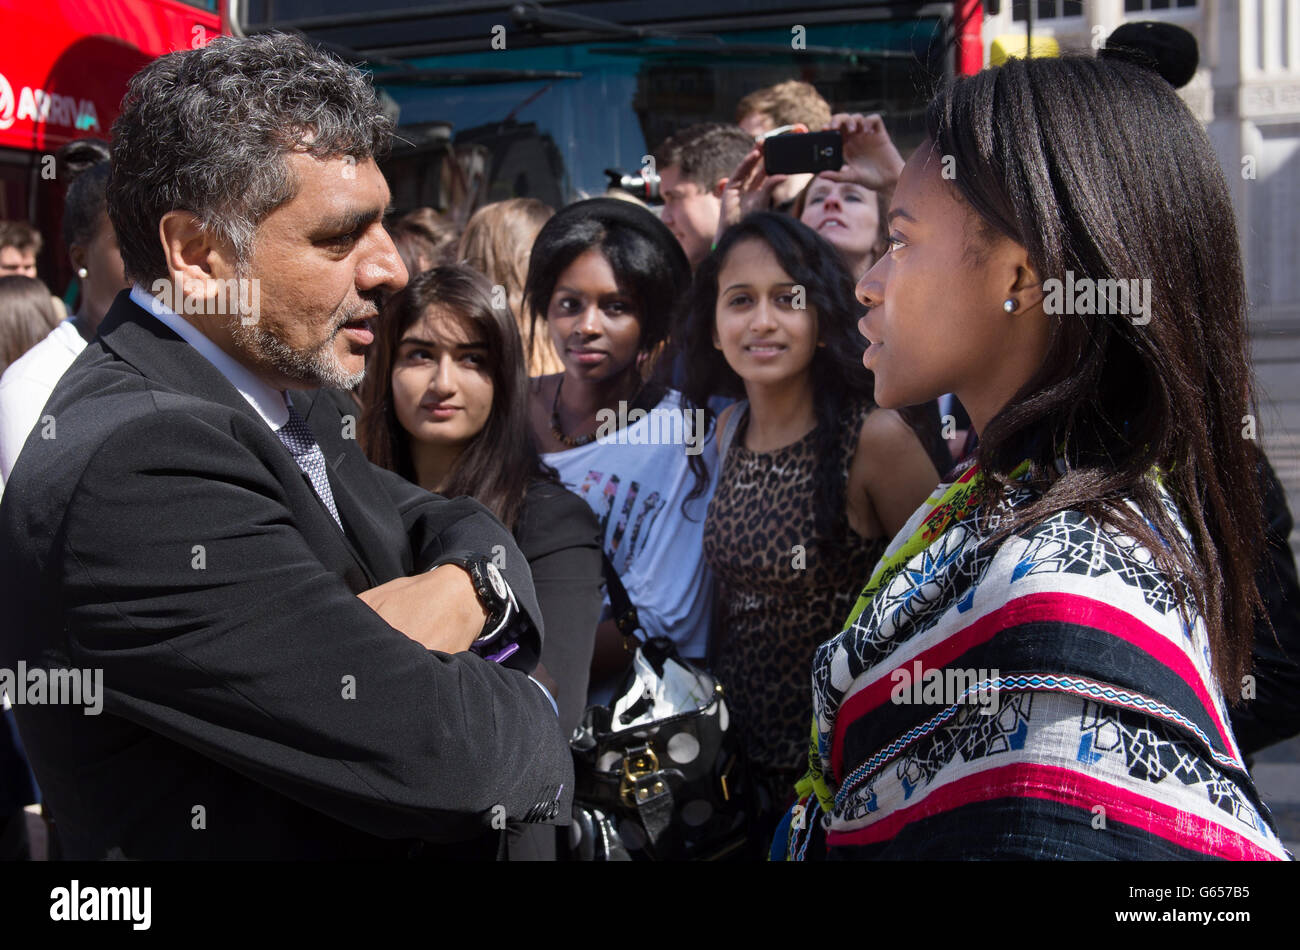 Business entrepreneur James Caan meets teenagers aboard a bus travelling to several companies in London to discuss future career opportunities and how to get on the employment ladder, as part of the government's Opening Doors Awards in which companies are encouraged to help young people into work placements. Stock Photo